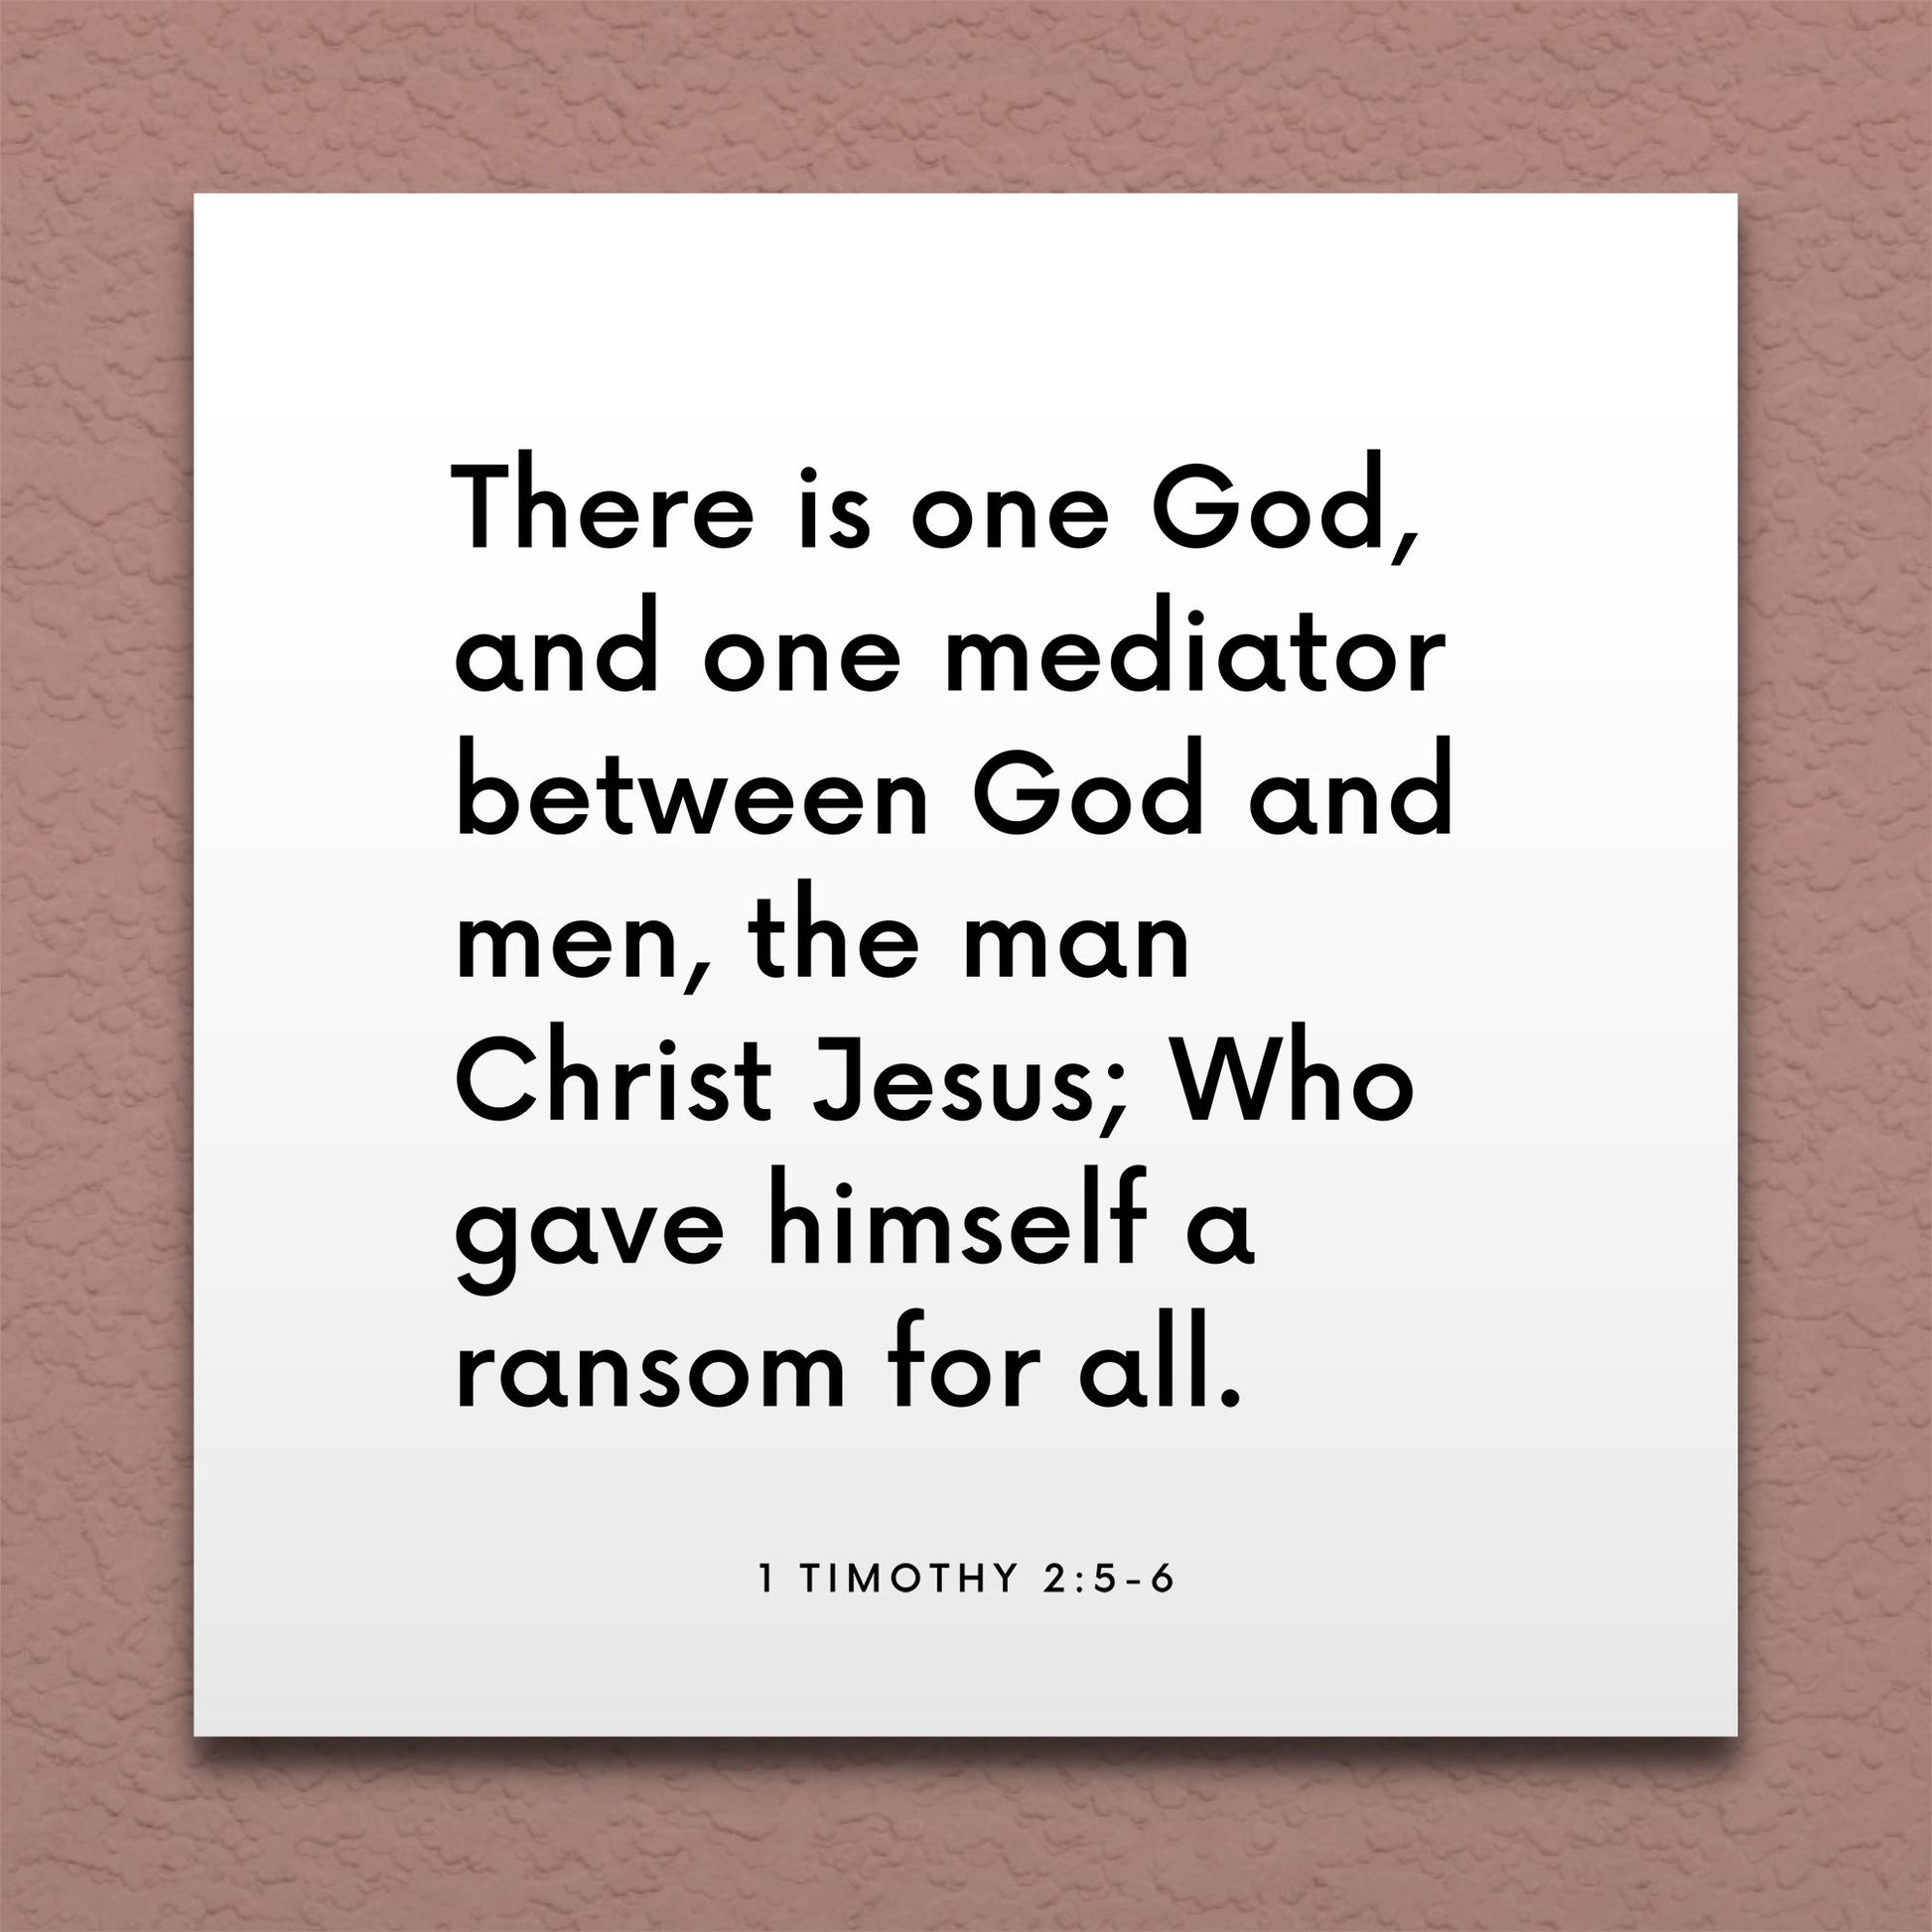 Wall-mounted scripture tile for 1 Timothy 2:5-6 - "There is one God, and one mediator between God and men"